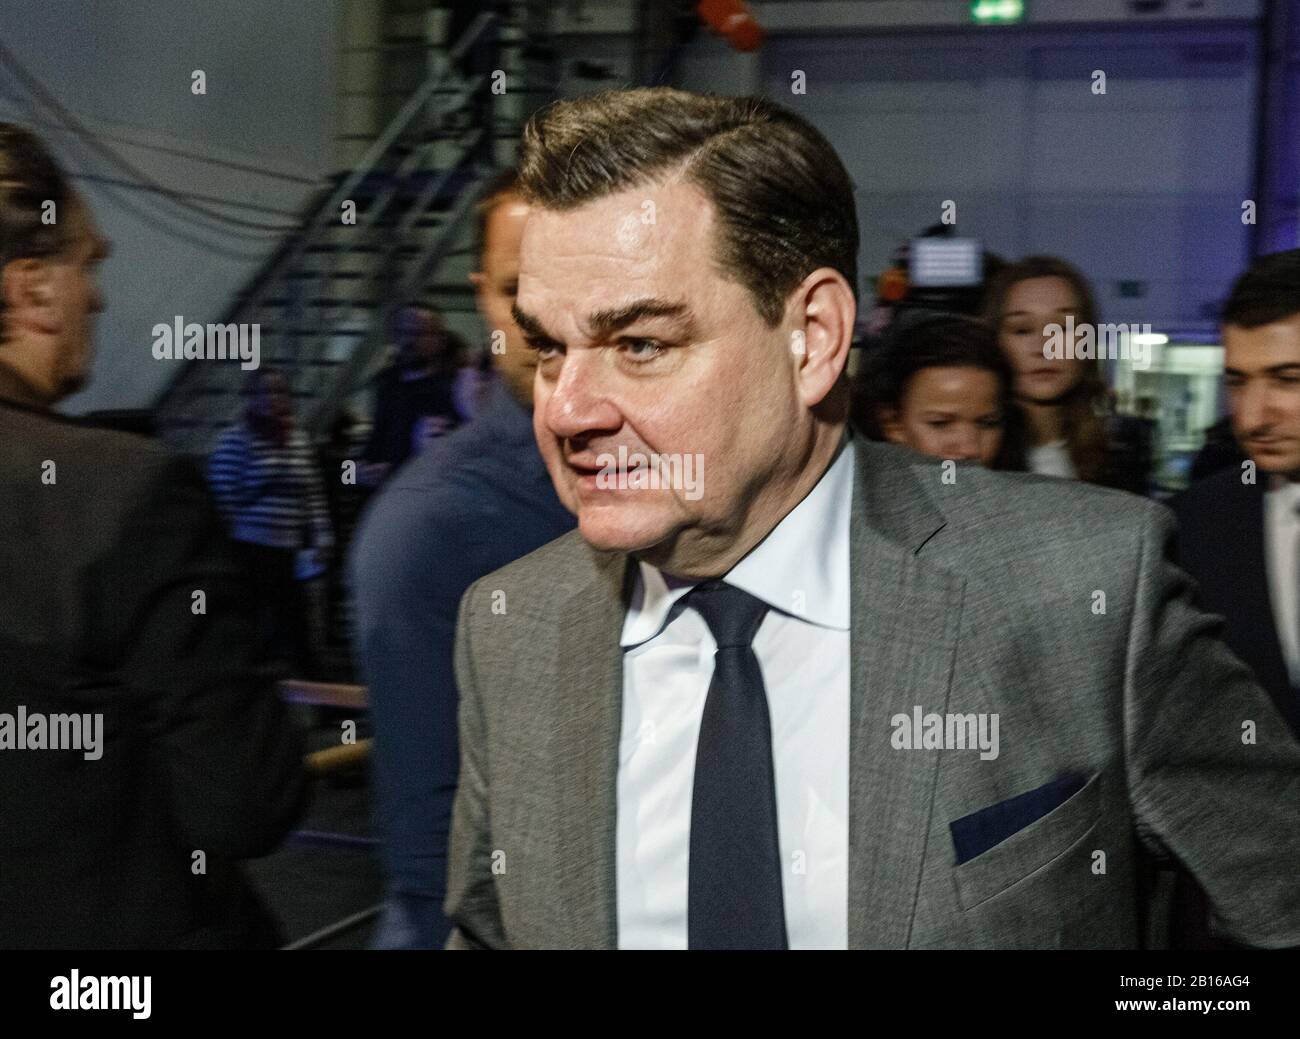 23 February 2020, Hamburg: Marcus Weinberg (CDU), top candidate for the election of the parliament, enters the media centre of the election. Around 1.32 million people in Hamburg were called upon to elect a new citizenship. Photo: Markus Scholz/dpa Stock Photo